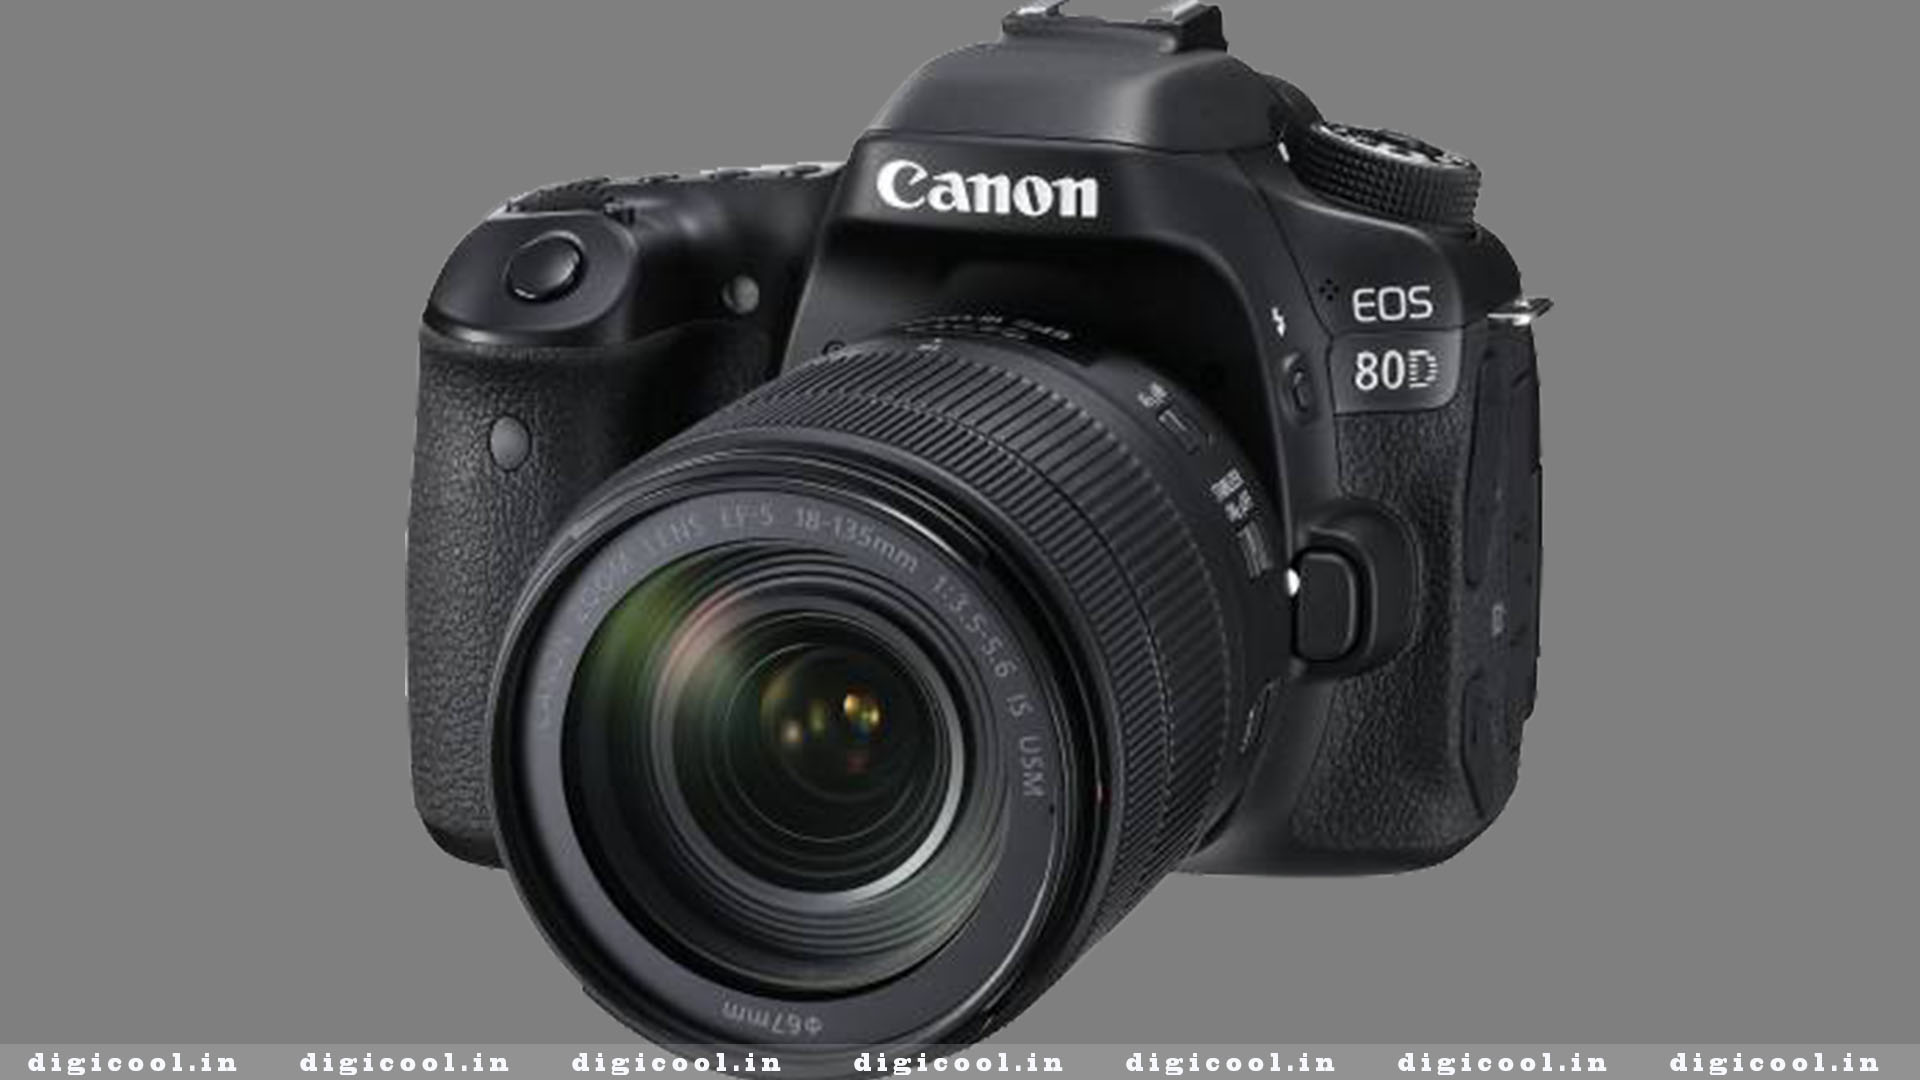 Canon EOS 80D DSLR Camera in India 2020 Review